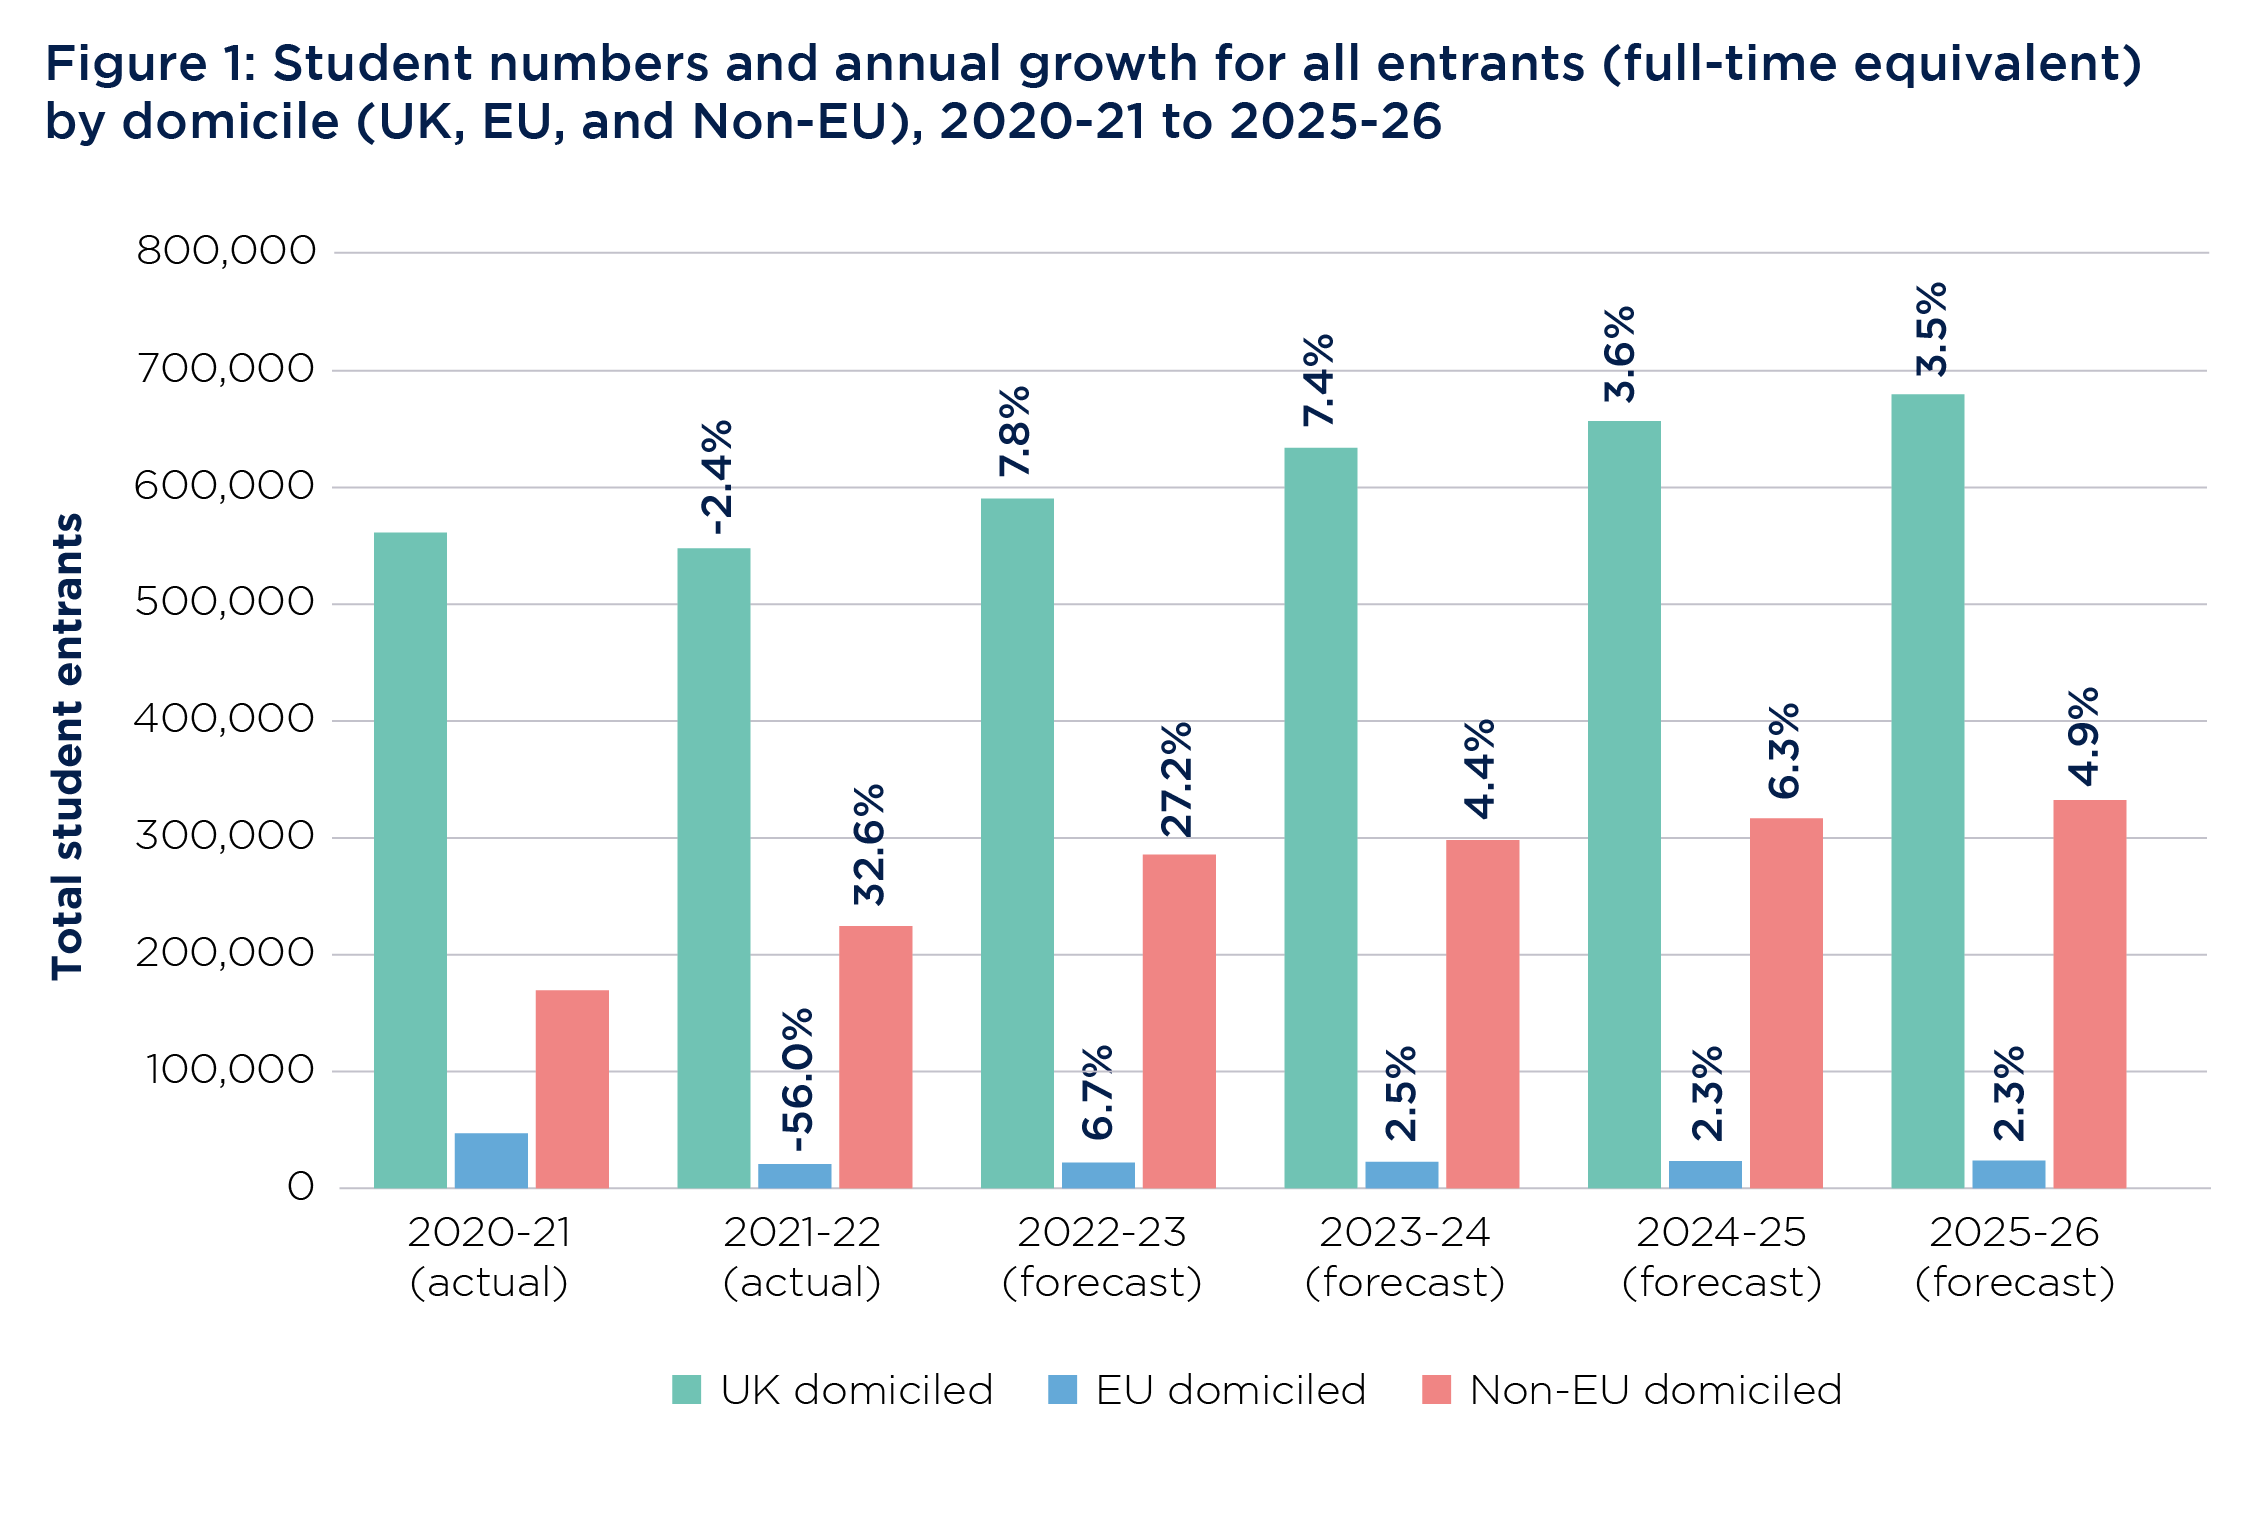 Figure 1 is a triple bar chart showing student numbers for the years 2020-21 to 2021-22 (actual) and 2022-23 to 2025-26 (forecast), for UK-domiciled, EU-domiciled and non-EU domiciled entrants. For each year from 2021-22, the percentage change since the previous year is shown for each population. In every year, there are significantly more UK students than non-EU-domiciled students, of whom there are in turn significantly more than EU-domiciled students. The total number of students is forecast to grow; however, the chart shows an overall decrease in EU-domiciled students over the period compared with 2020-21, while the other groups are forecast to grow in size.